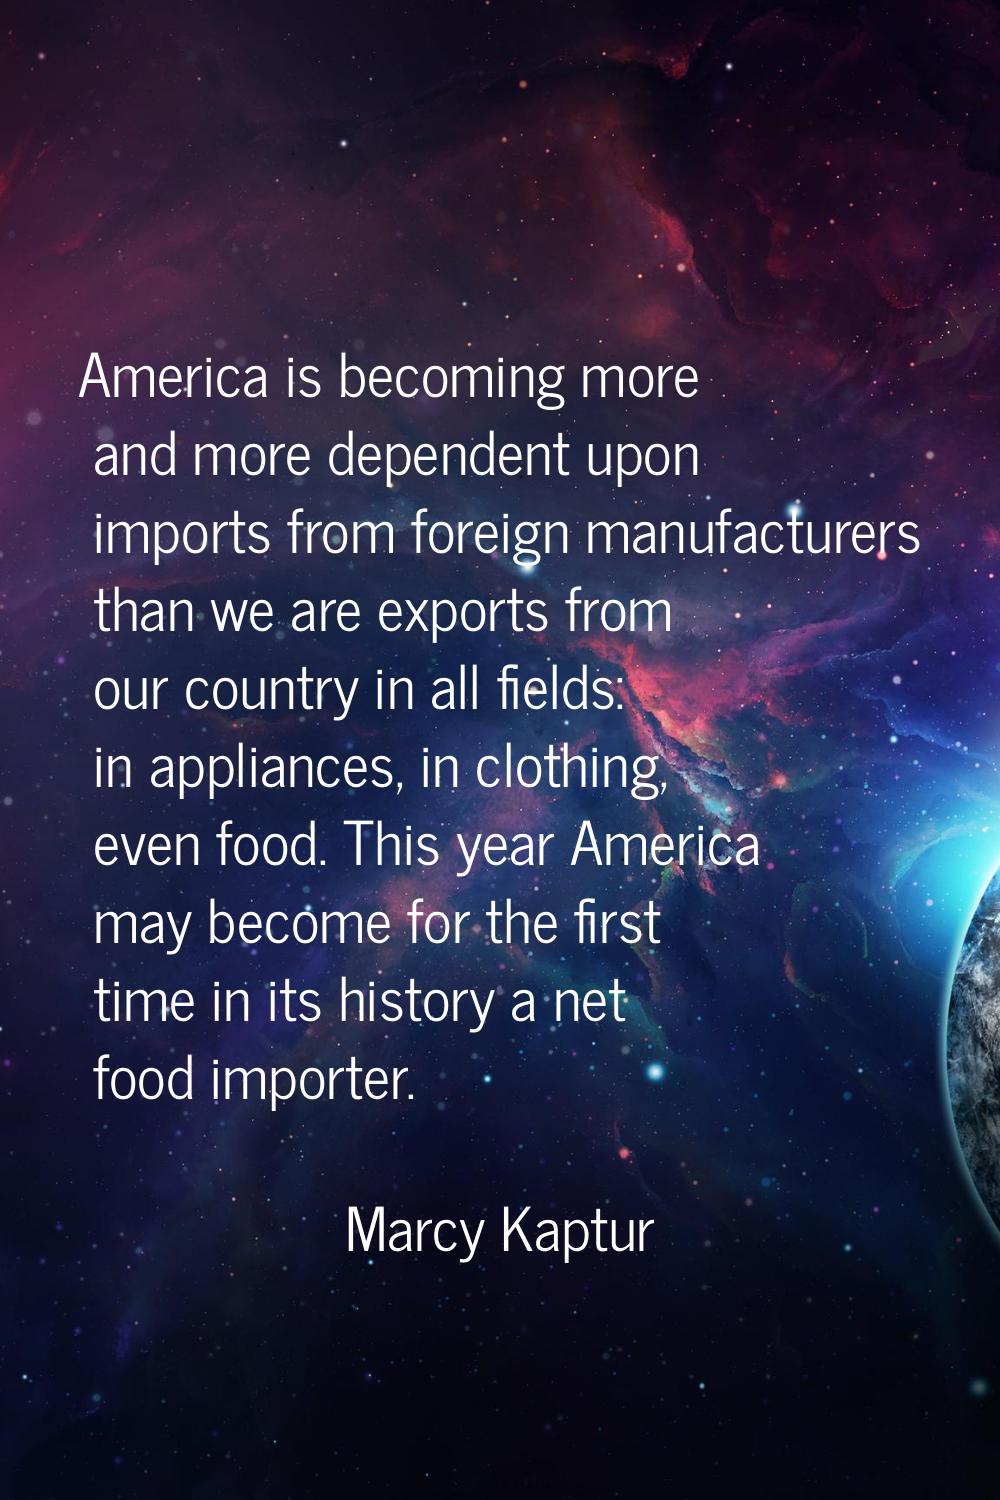 America is becoming more and more dependent upon imports from foreign manufacturers than we are exp